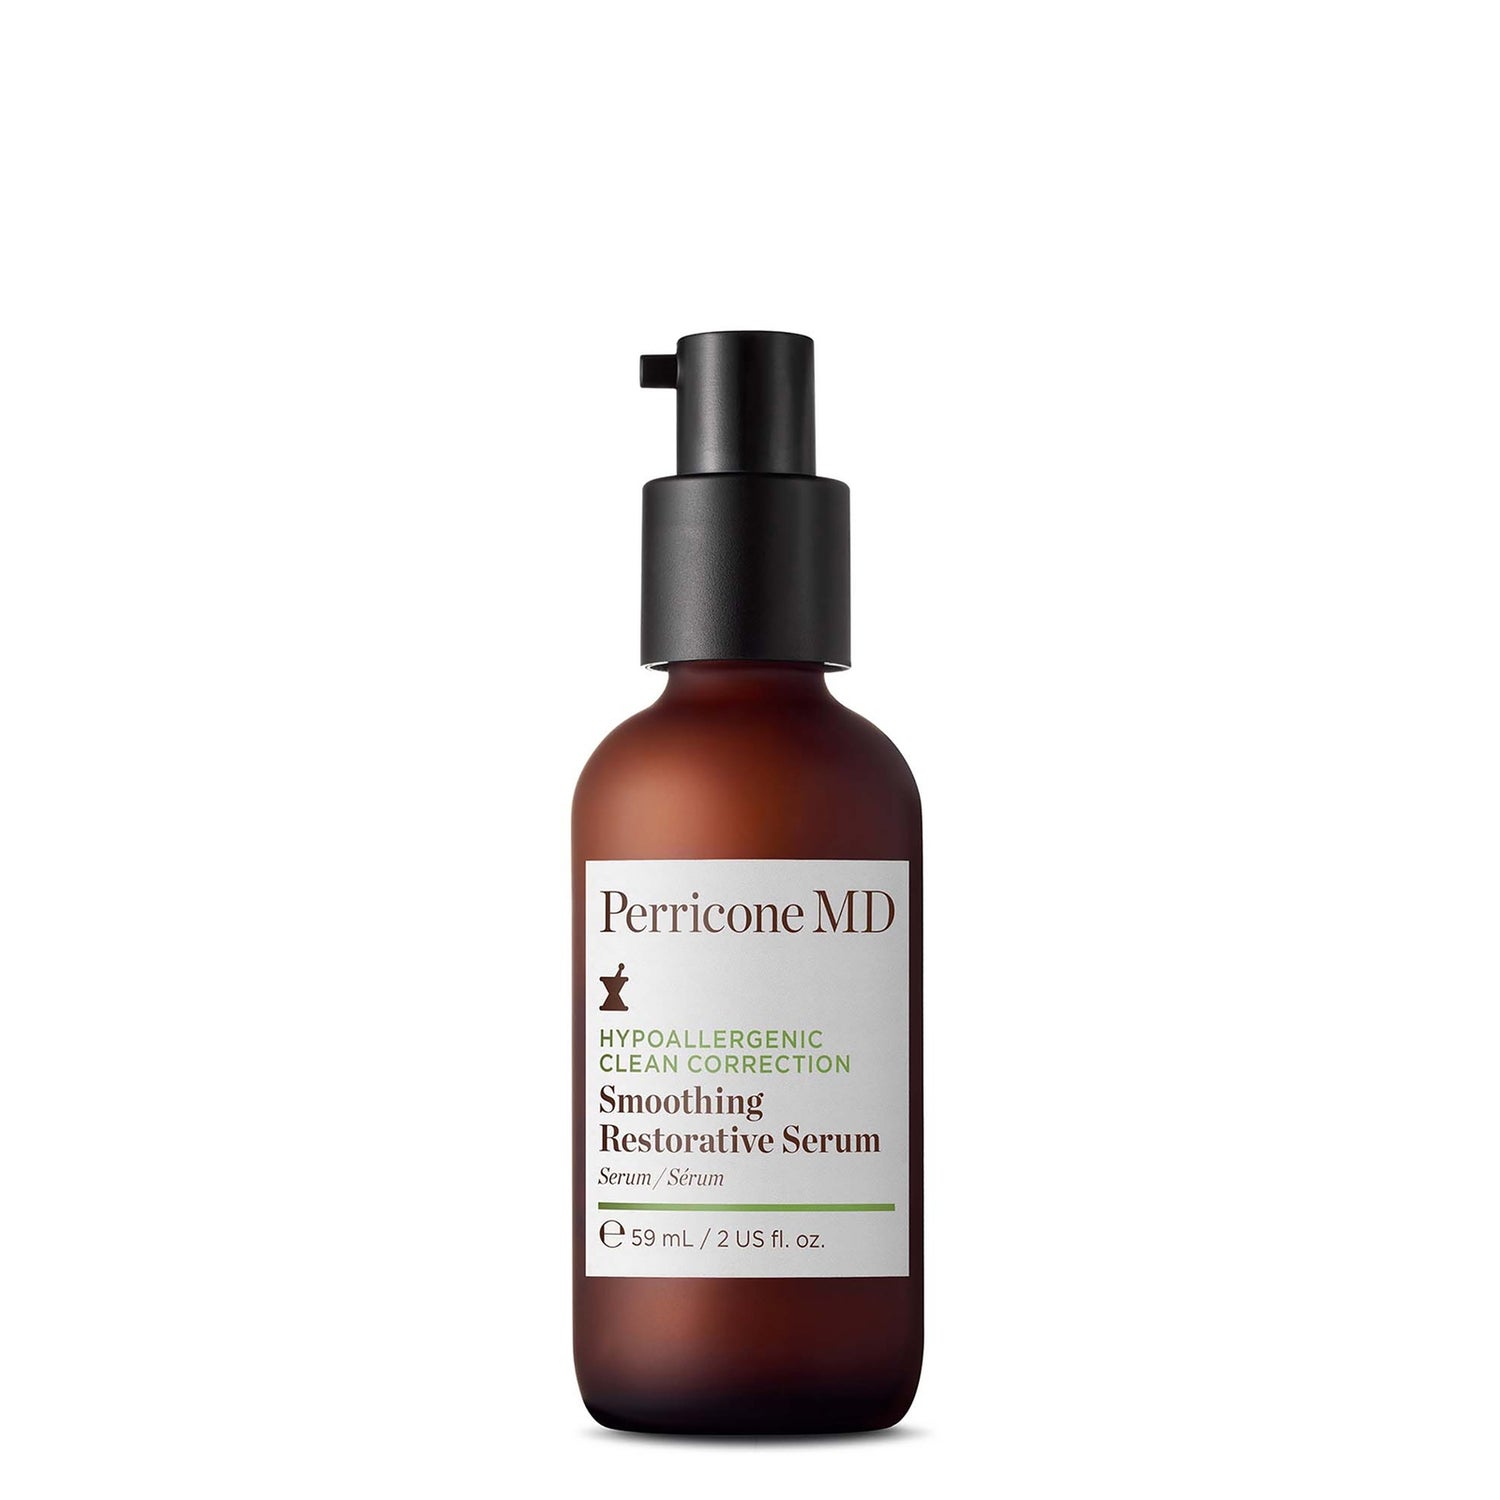 Perricone MD Hypoallergenic Clean Correction Smoothing Restorative Serum 59ml